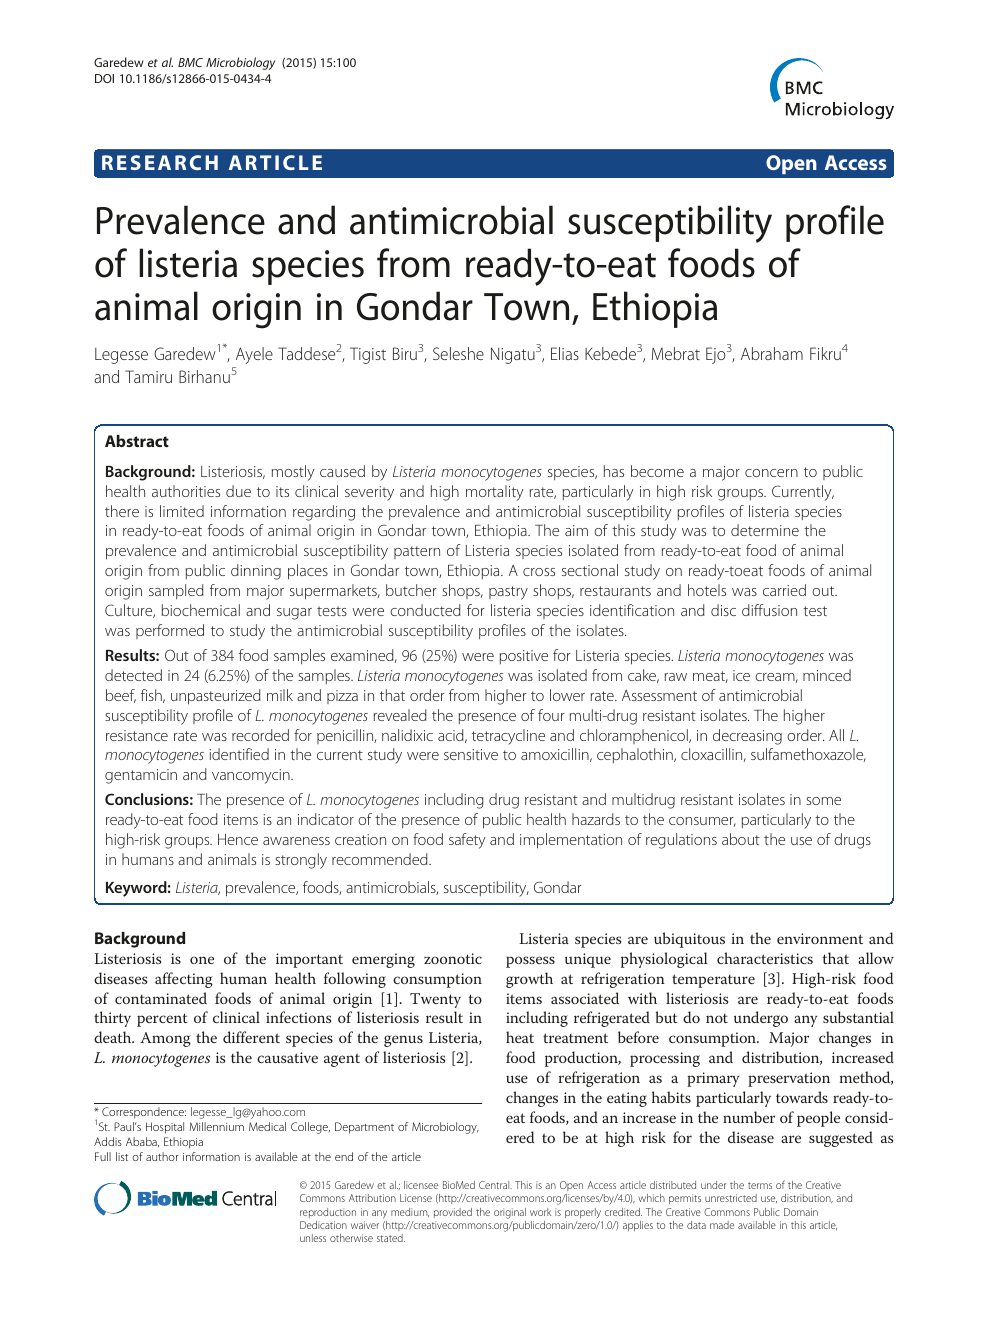 Prevalence and antimicrobial susceptibility profile of listeria species  from ready-to-eat foods of animal origin in Gondar Town, Ethiopia – topic  of research paper in Veterinary science. Download scholarly article PDF and  read